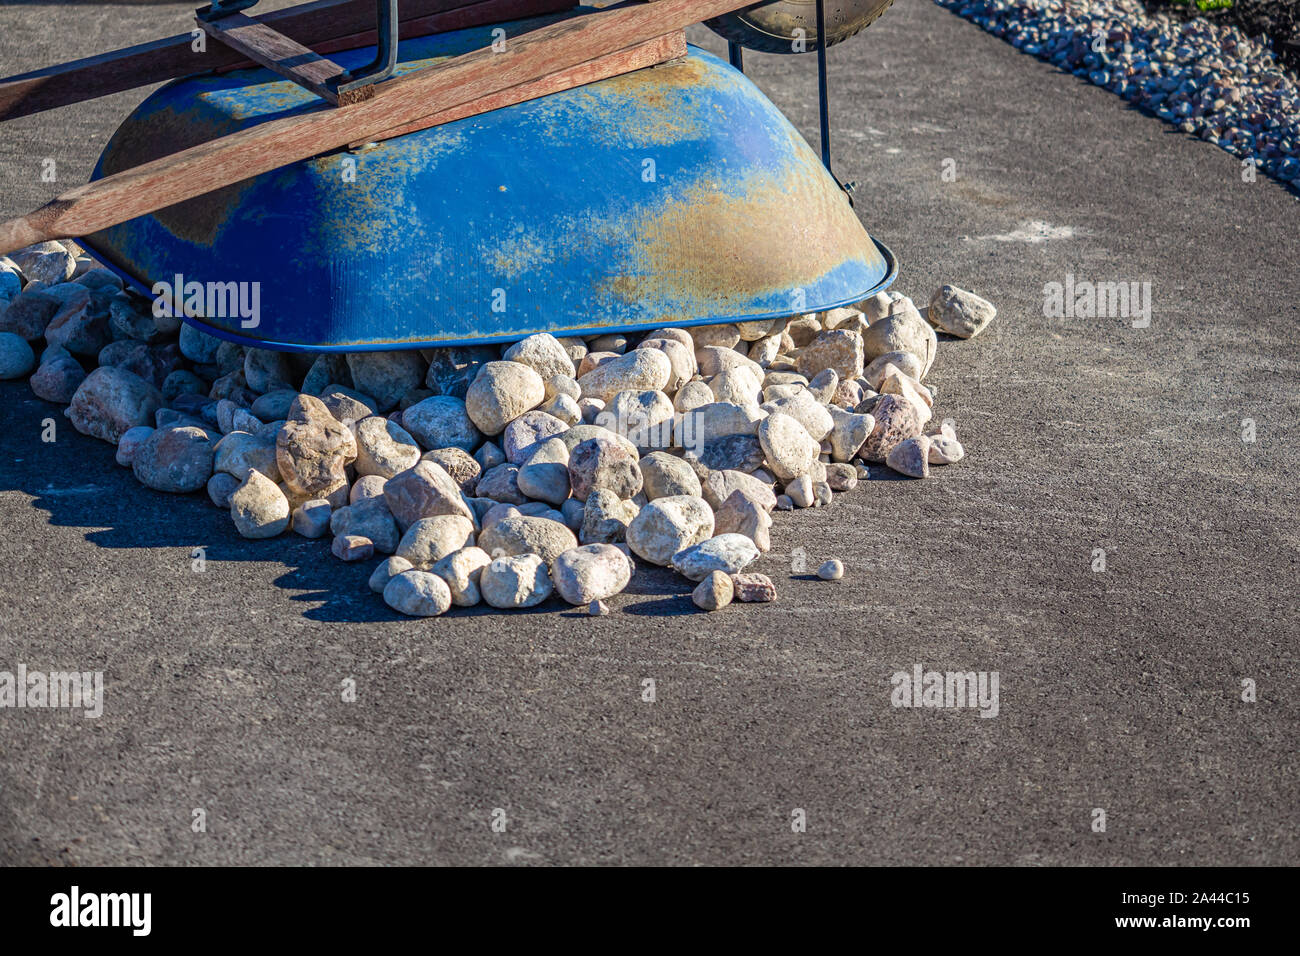 An overturned blue wheelbarrow lies on top of its payload of white stones on an asphalt suburban driveway. Stock Photo